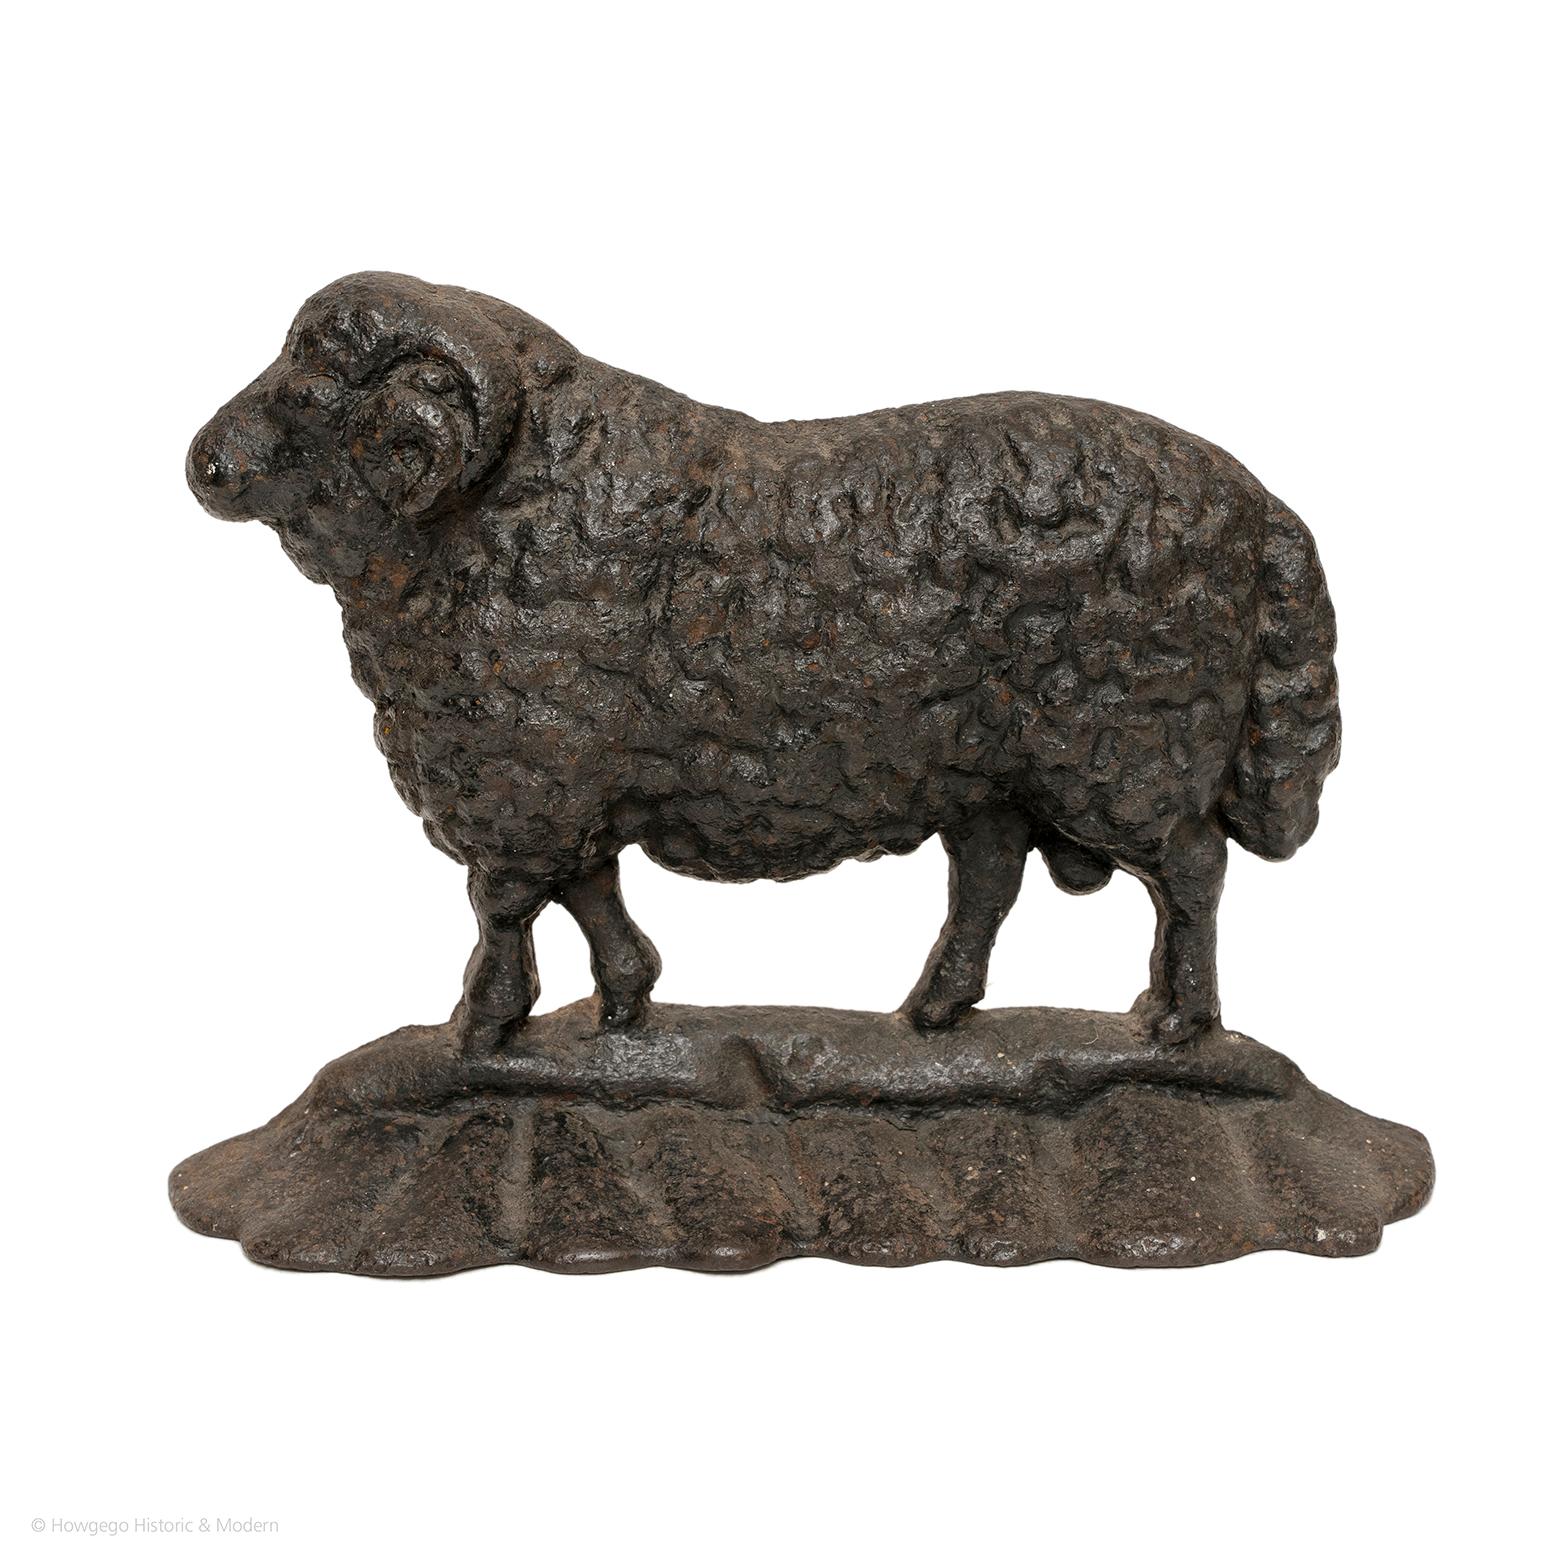 Charming 19th century metal doorstop moulded as ram
Lovely crusty patina
Measures: length 26cm, 10